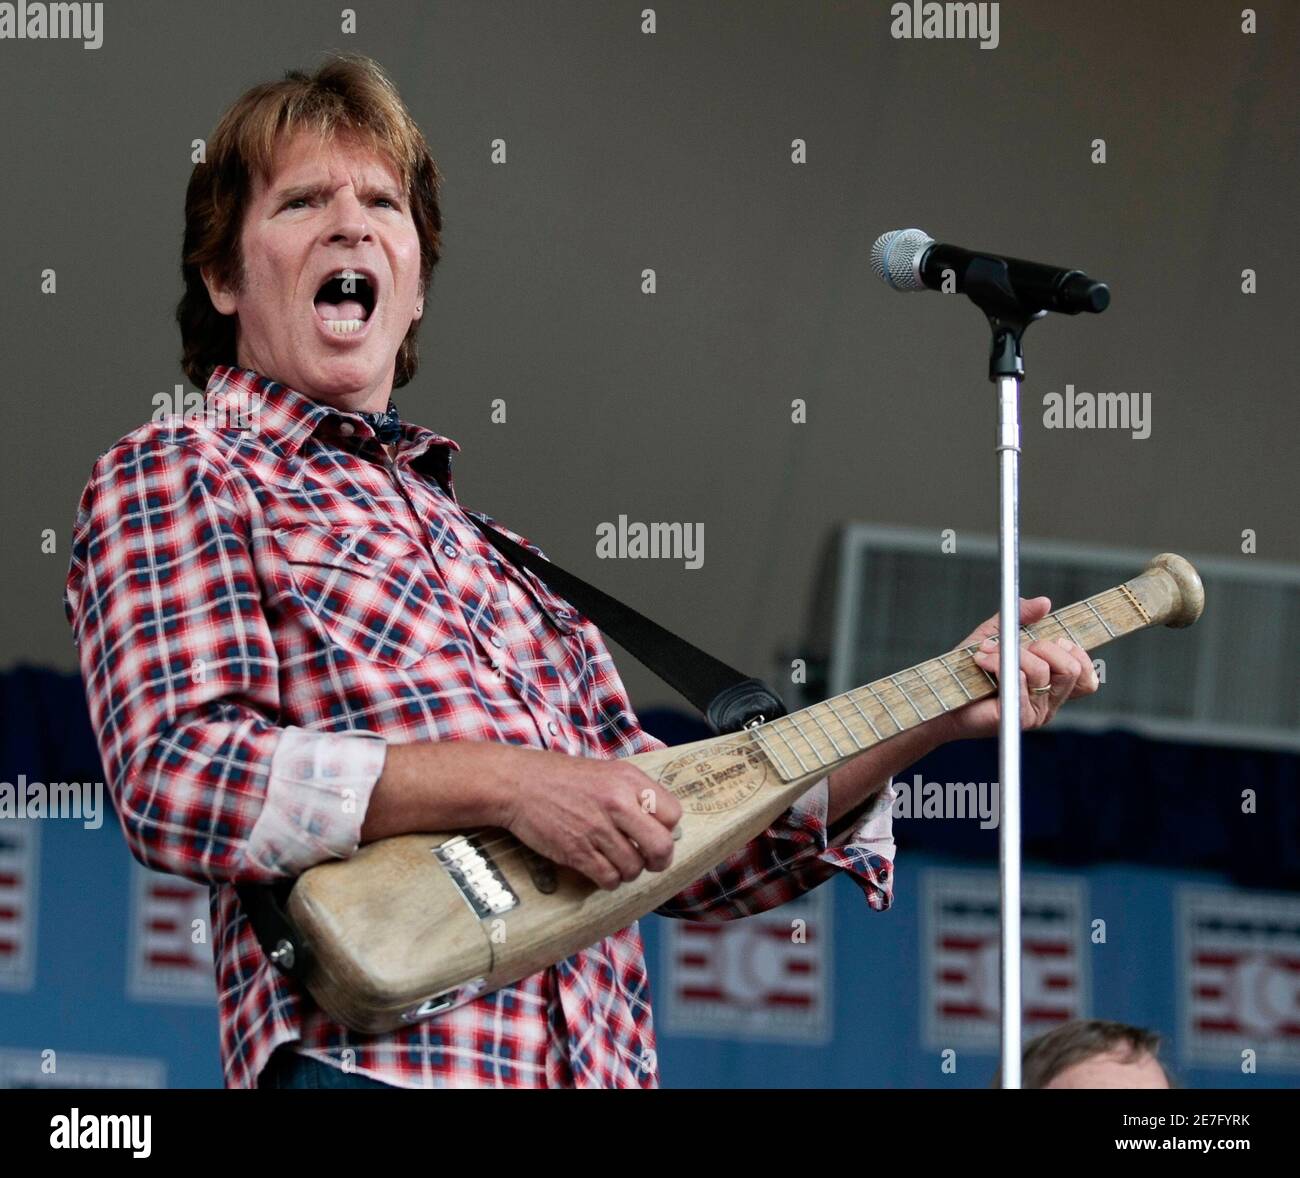 Musician John Fogerty sings his classic song, "Centerfield" during National  Baseball Hall of Fame induction ceremonies in Cooperstown, New York, July  25, 2010. Fogerty and his song were honored on the occasion